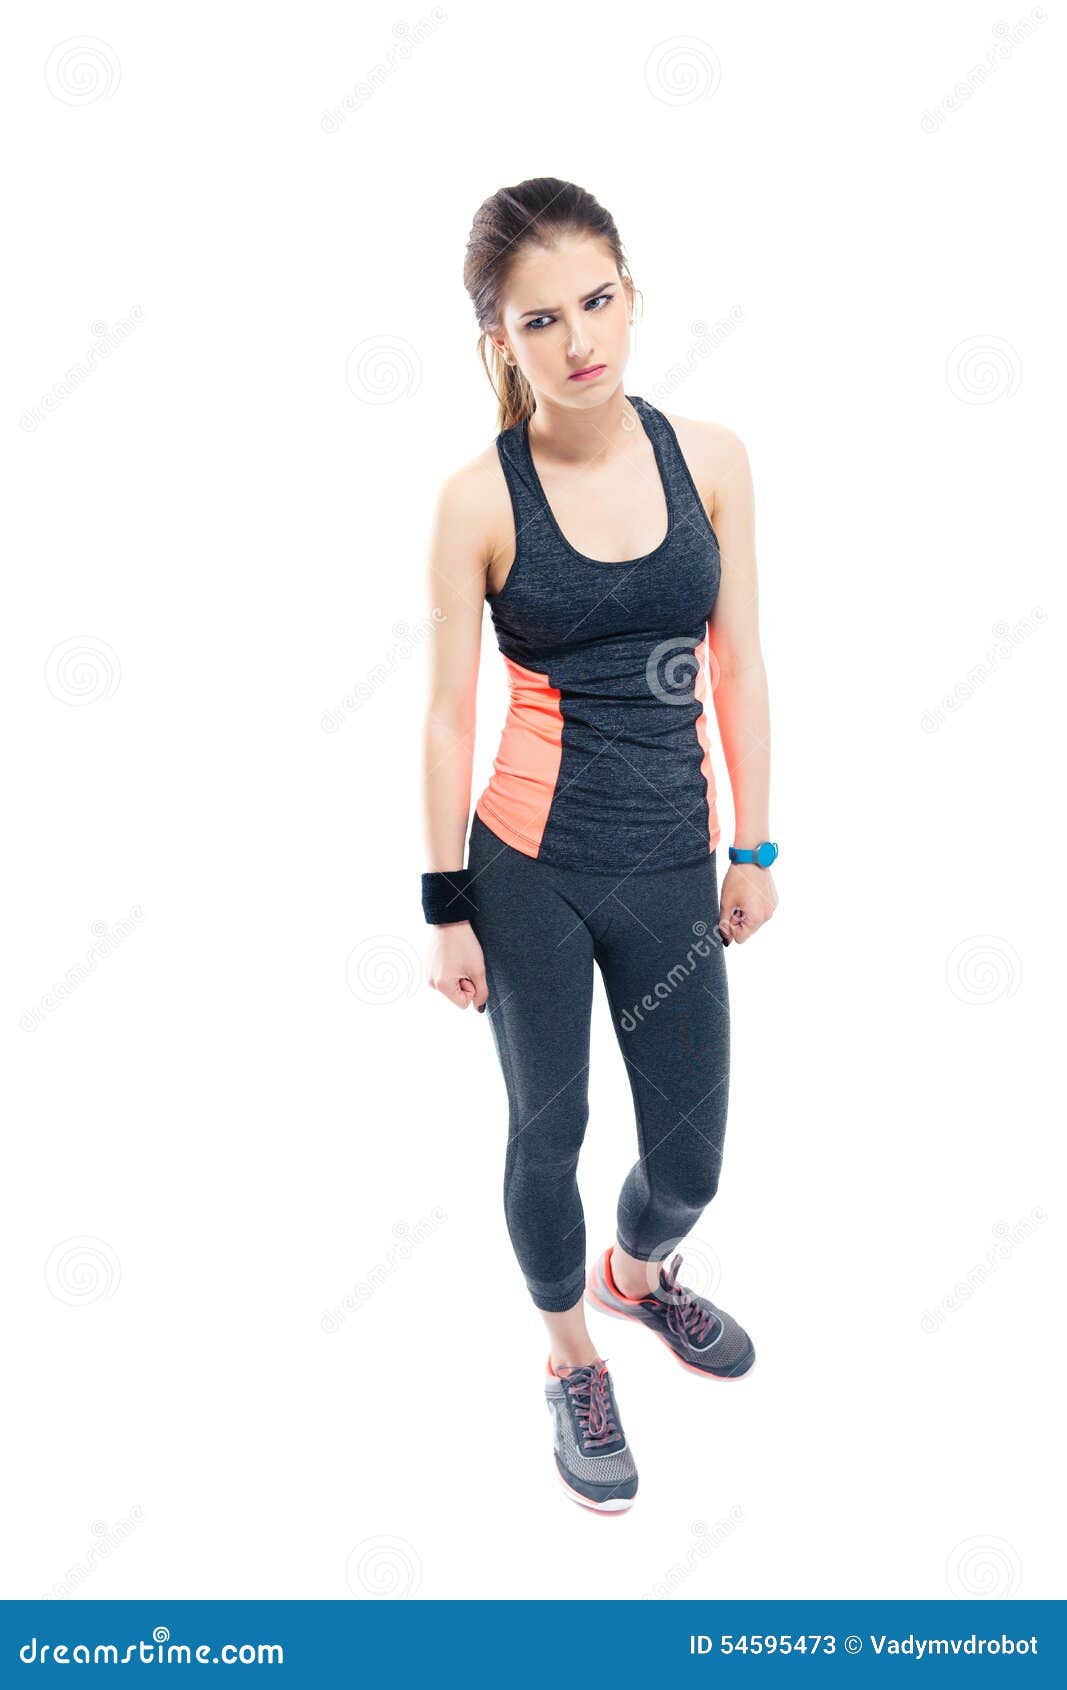 Full Length Portrait of a Pensive Sporty Woman Stock Image - Image of ...